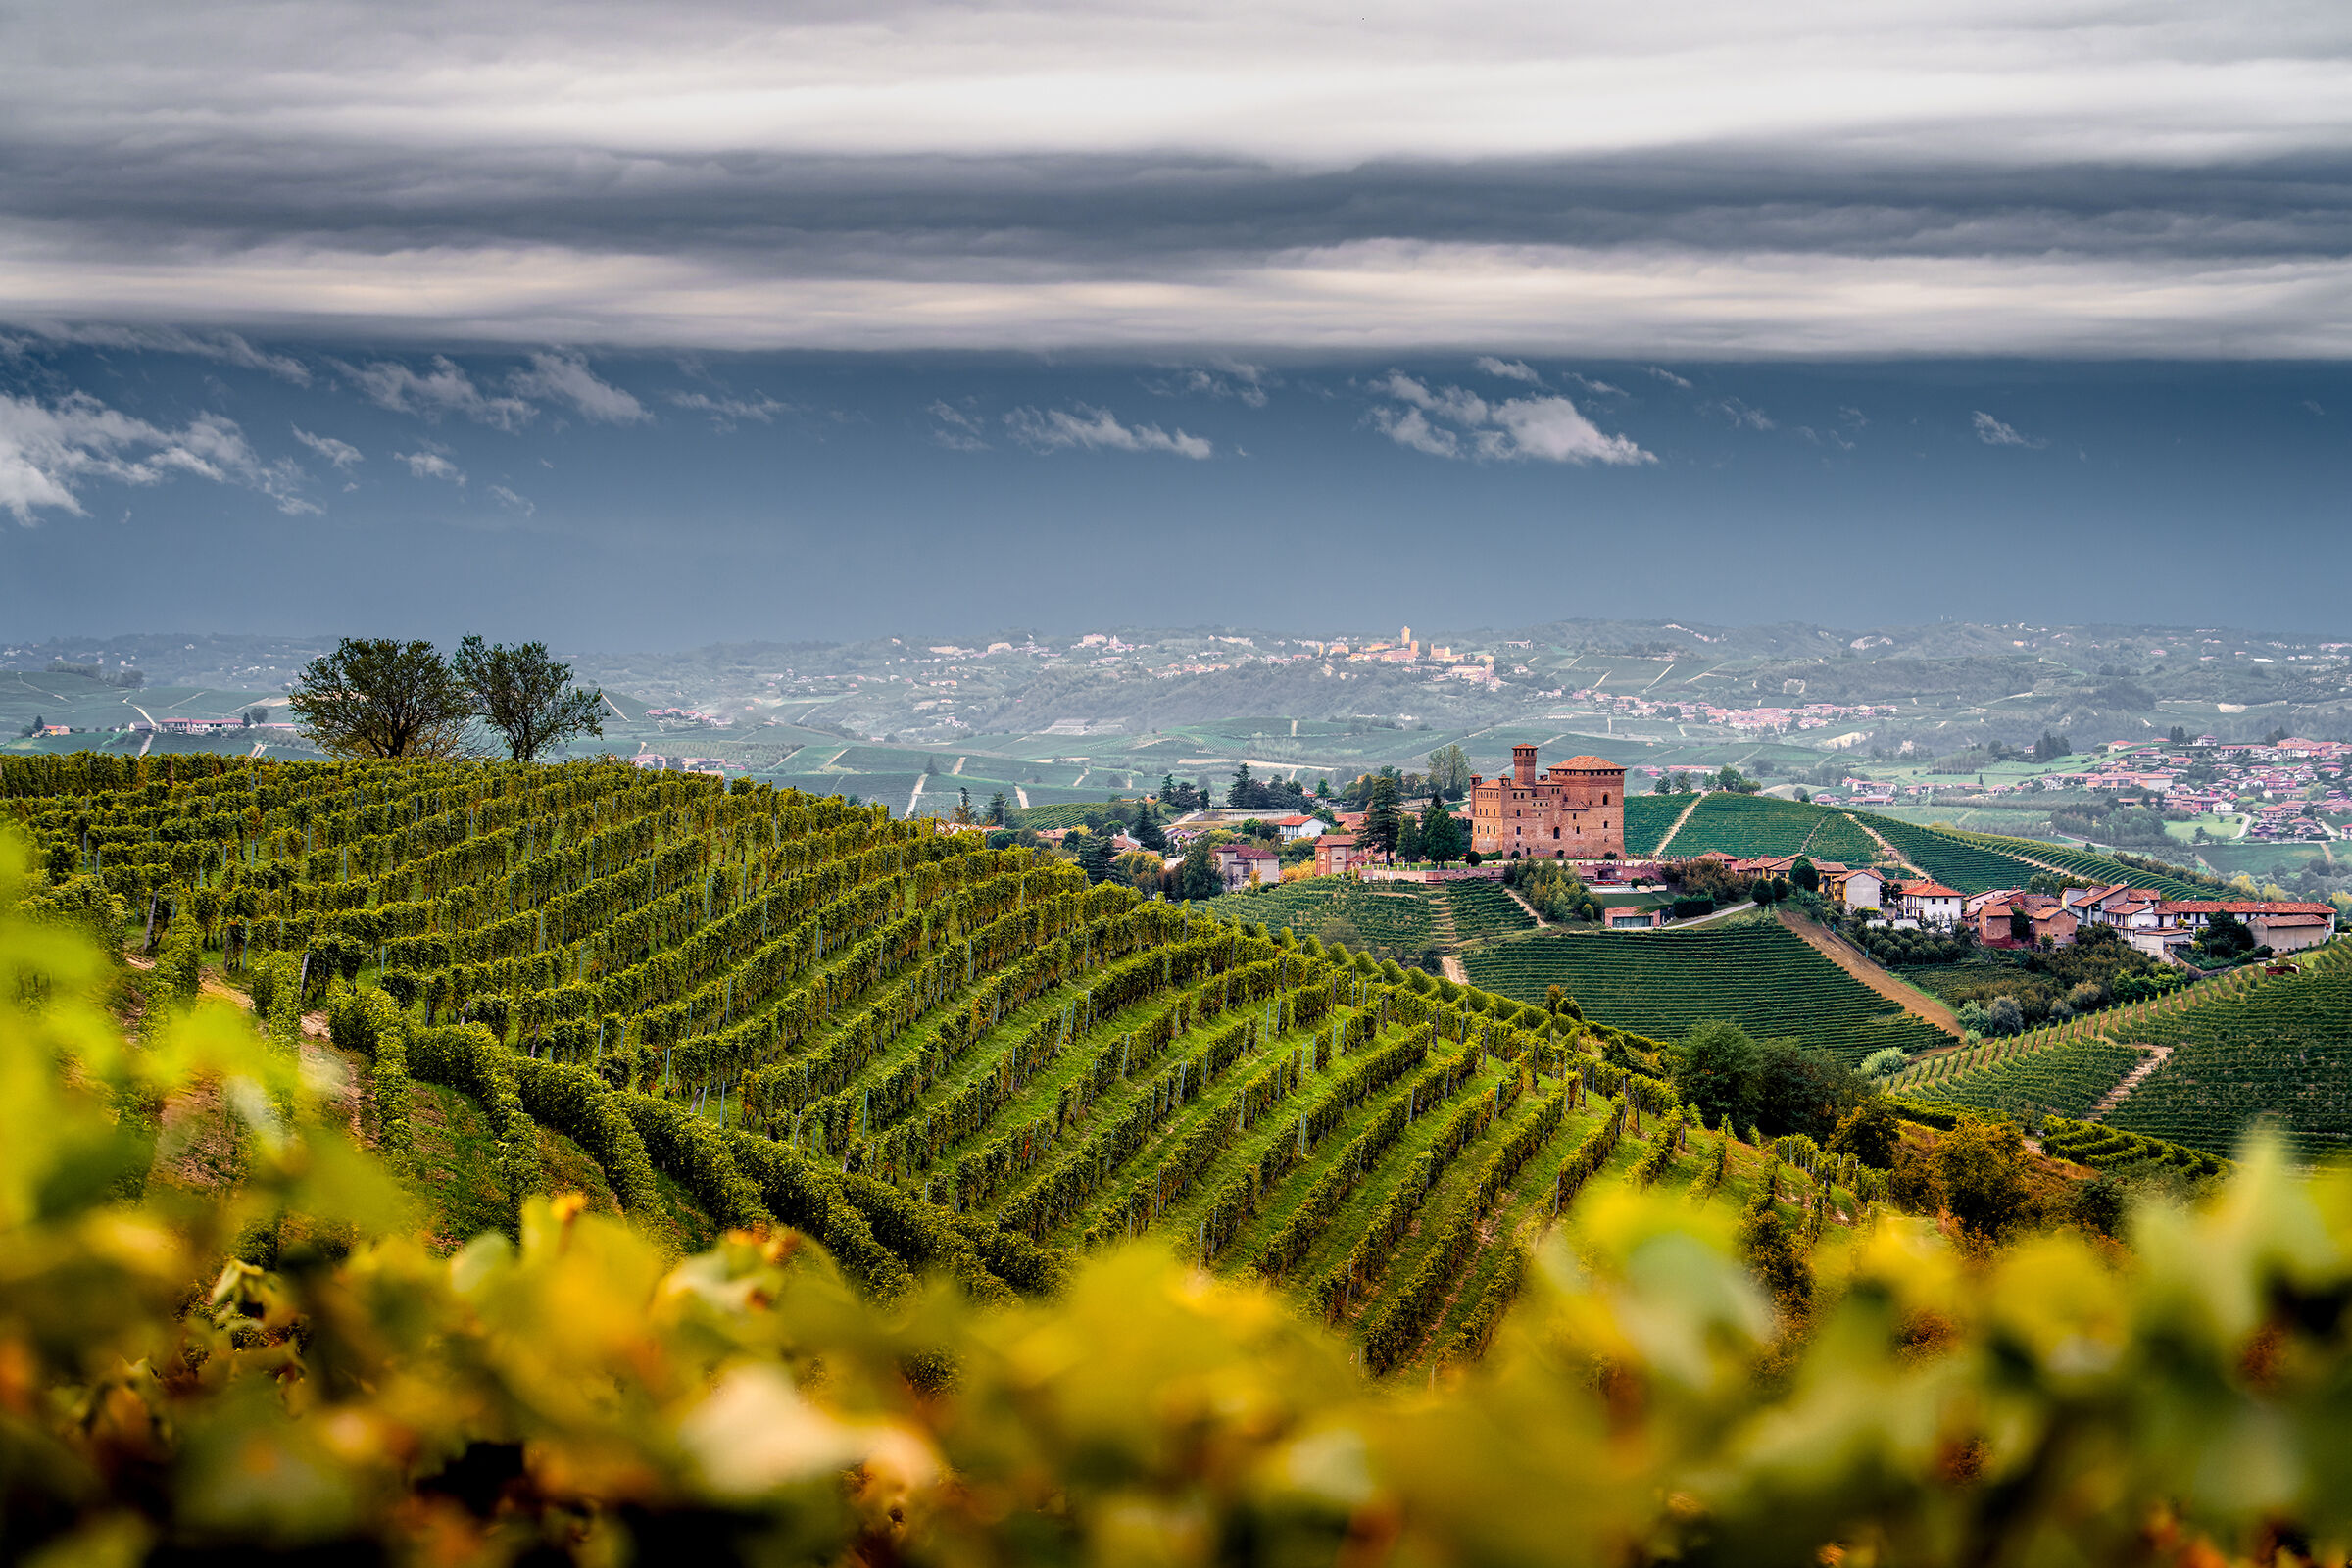 Waiting for autumn in the vineyards of Grinzane...